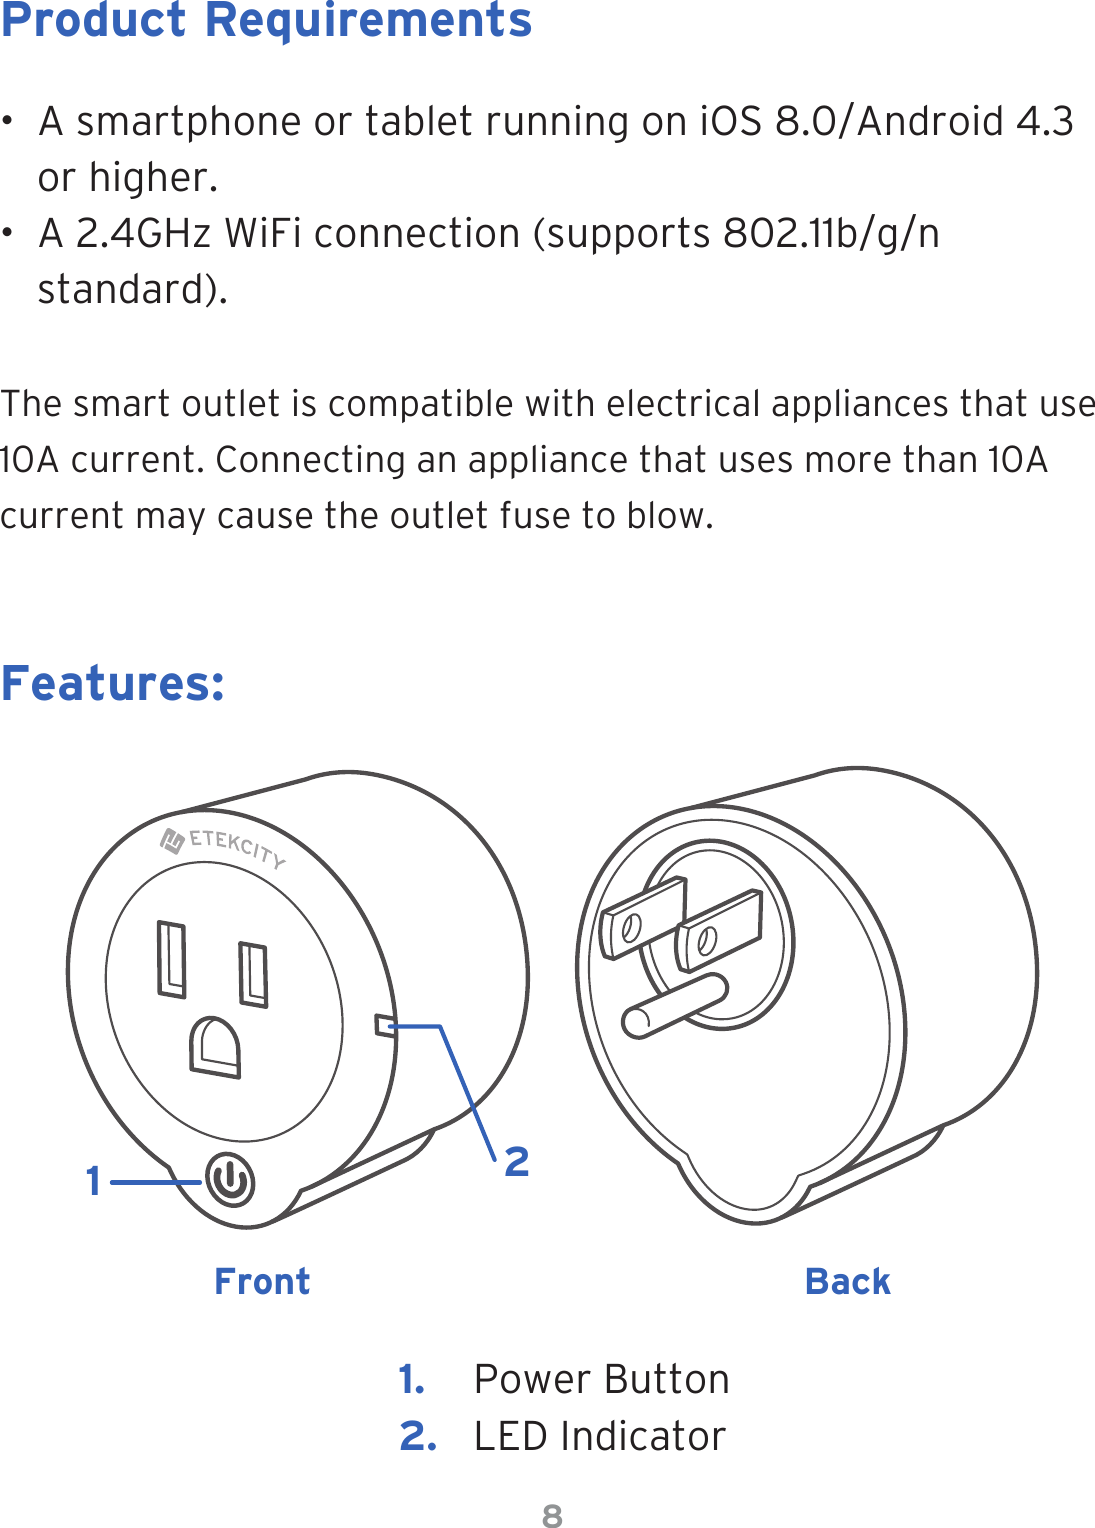 8•  A smartphone or tablet running on iOS 8.0/Android 4.3 or higher.•  A 2.4GHz WiFi connection (supports 802.11b/g/n standard).The smart outlet is compatible with electrical appliances that use 10A current. Connecting an appliance that uses more than 10A current may cause the outlet fuse to blow.Product RequirementsFeatures:Front Back1.  Power Button2.  LED Indicator12